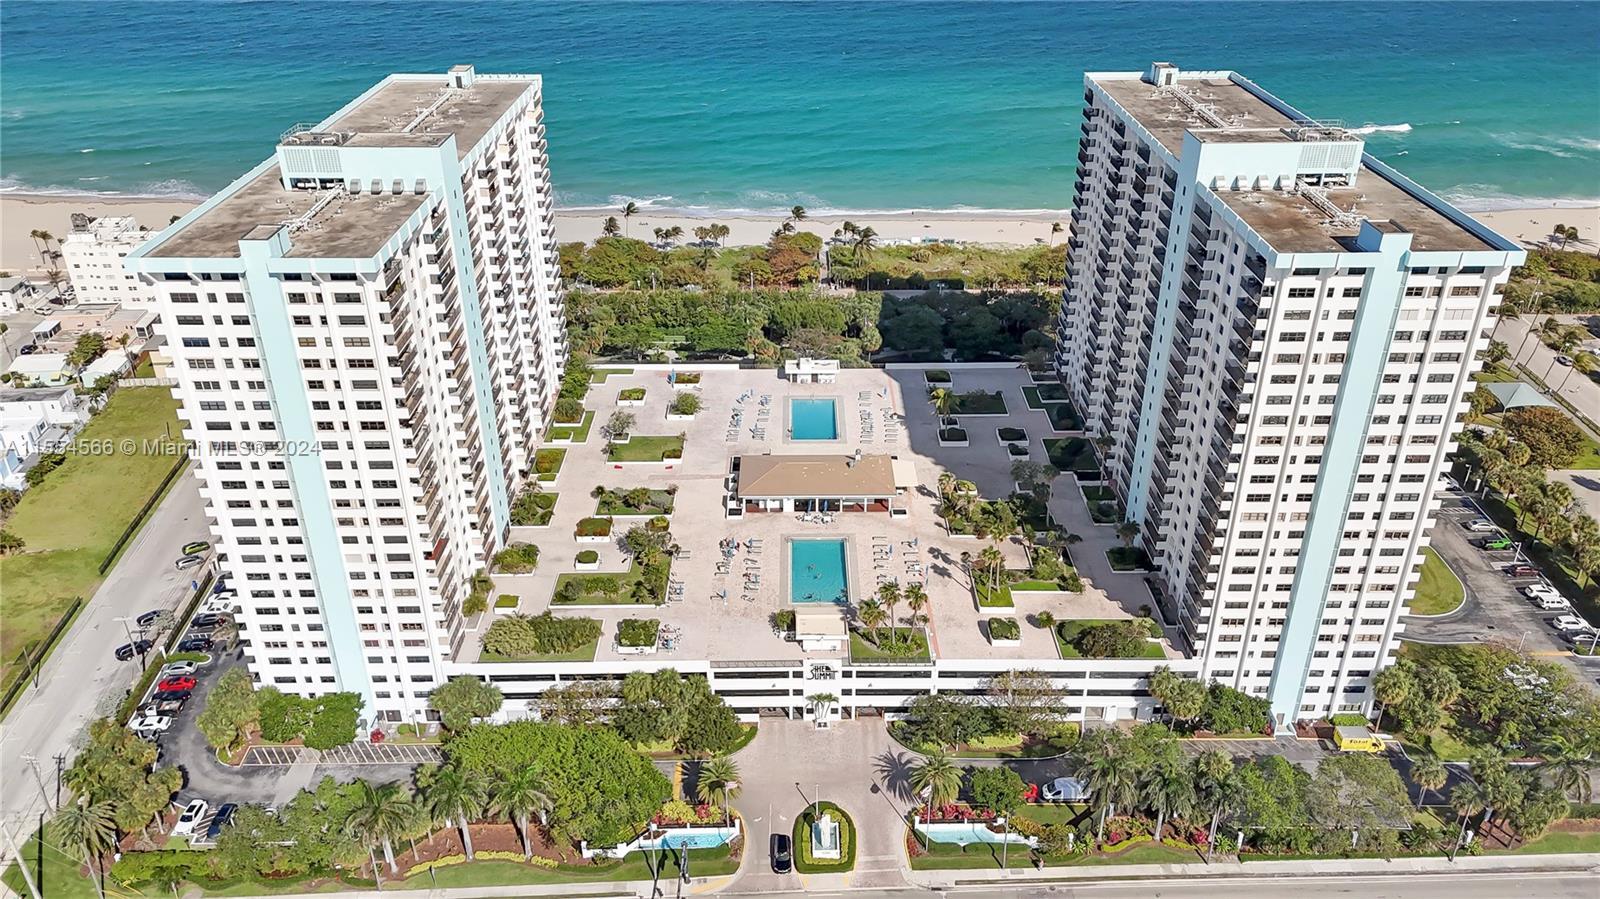 One of Hollywood Beach's Premier Properties. This is The Summit, built on a very large Parcel that s